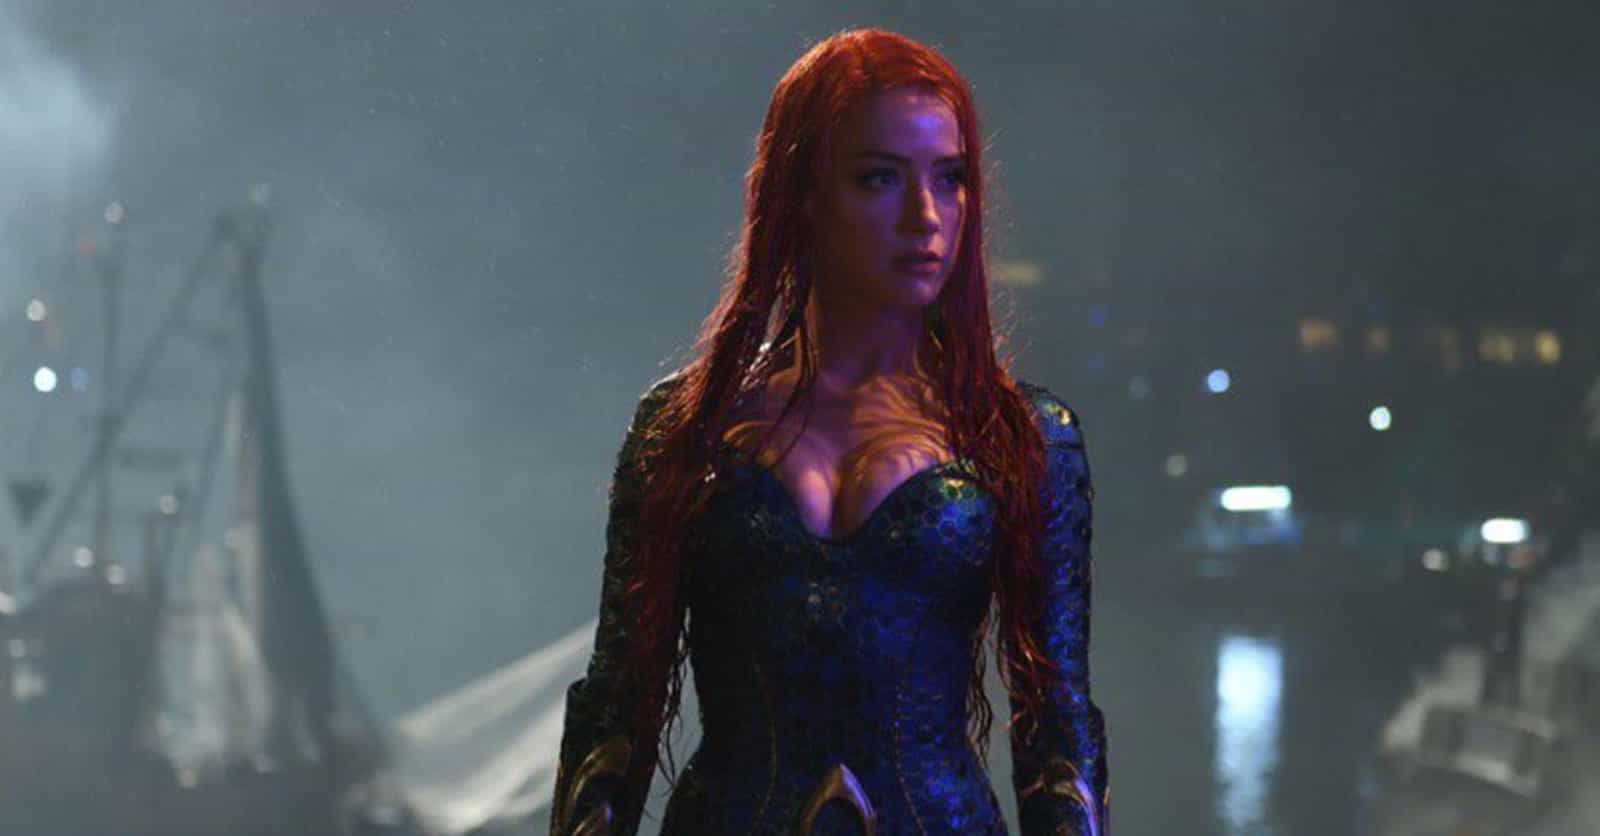 Everything You Need To Know About Mera, Queen Of Atlantis And Aquaman's Wife